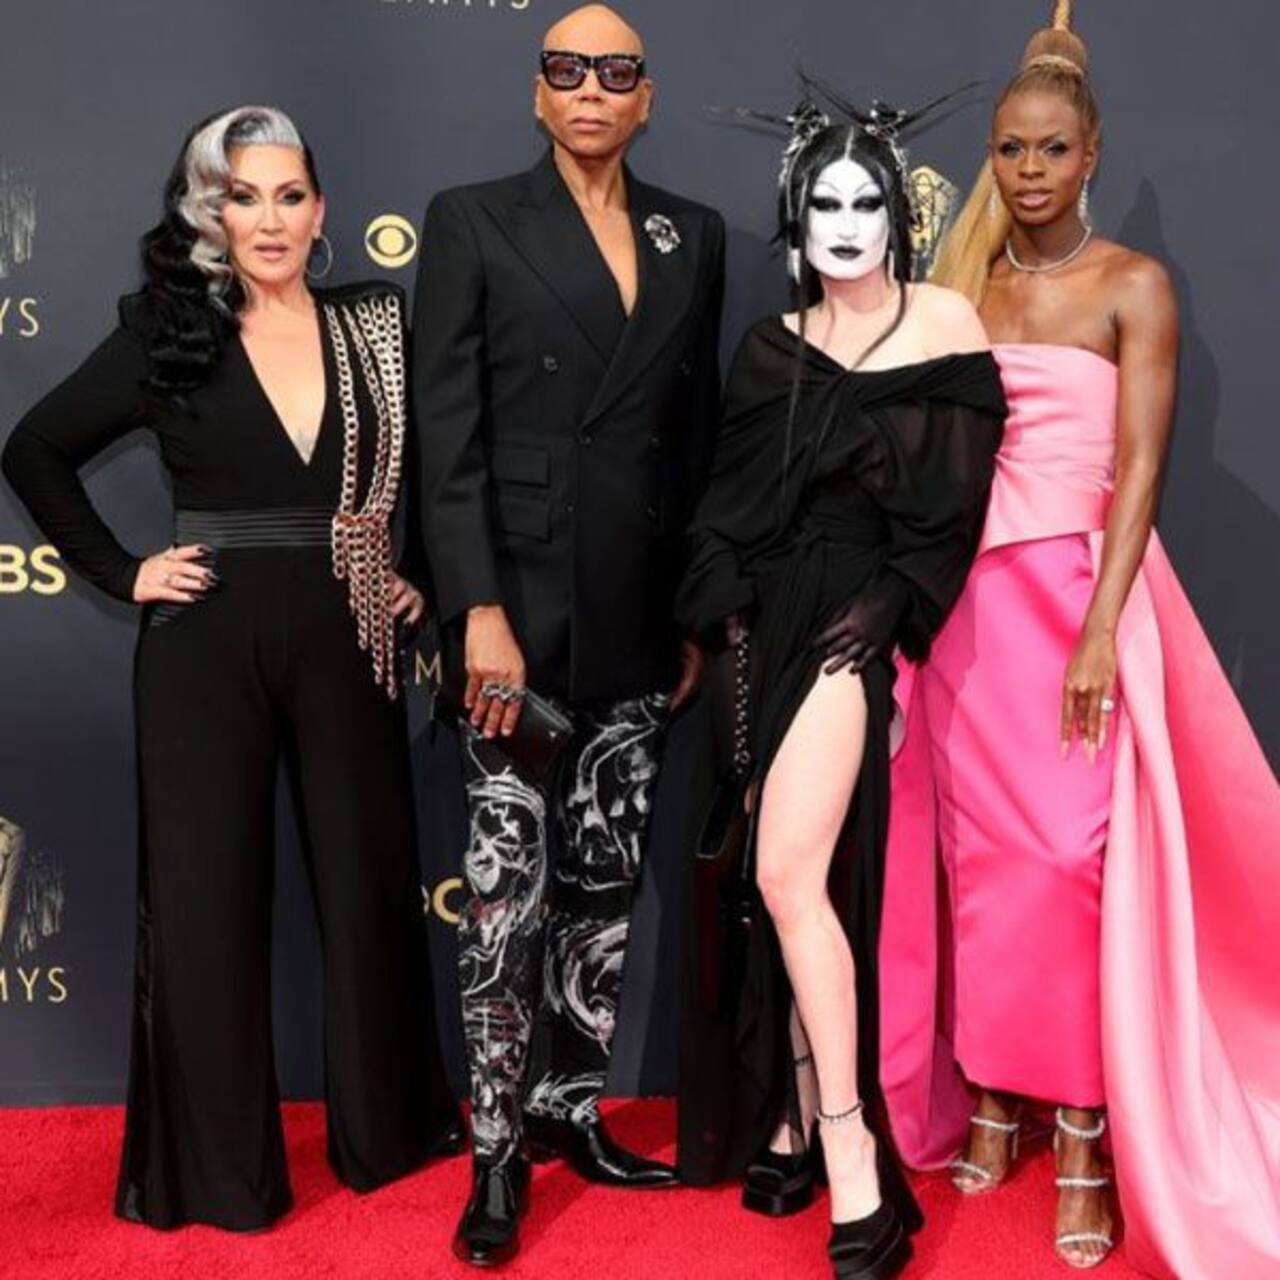 RuPaul and his drag queens